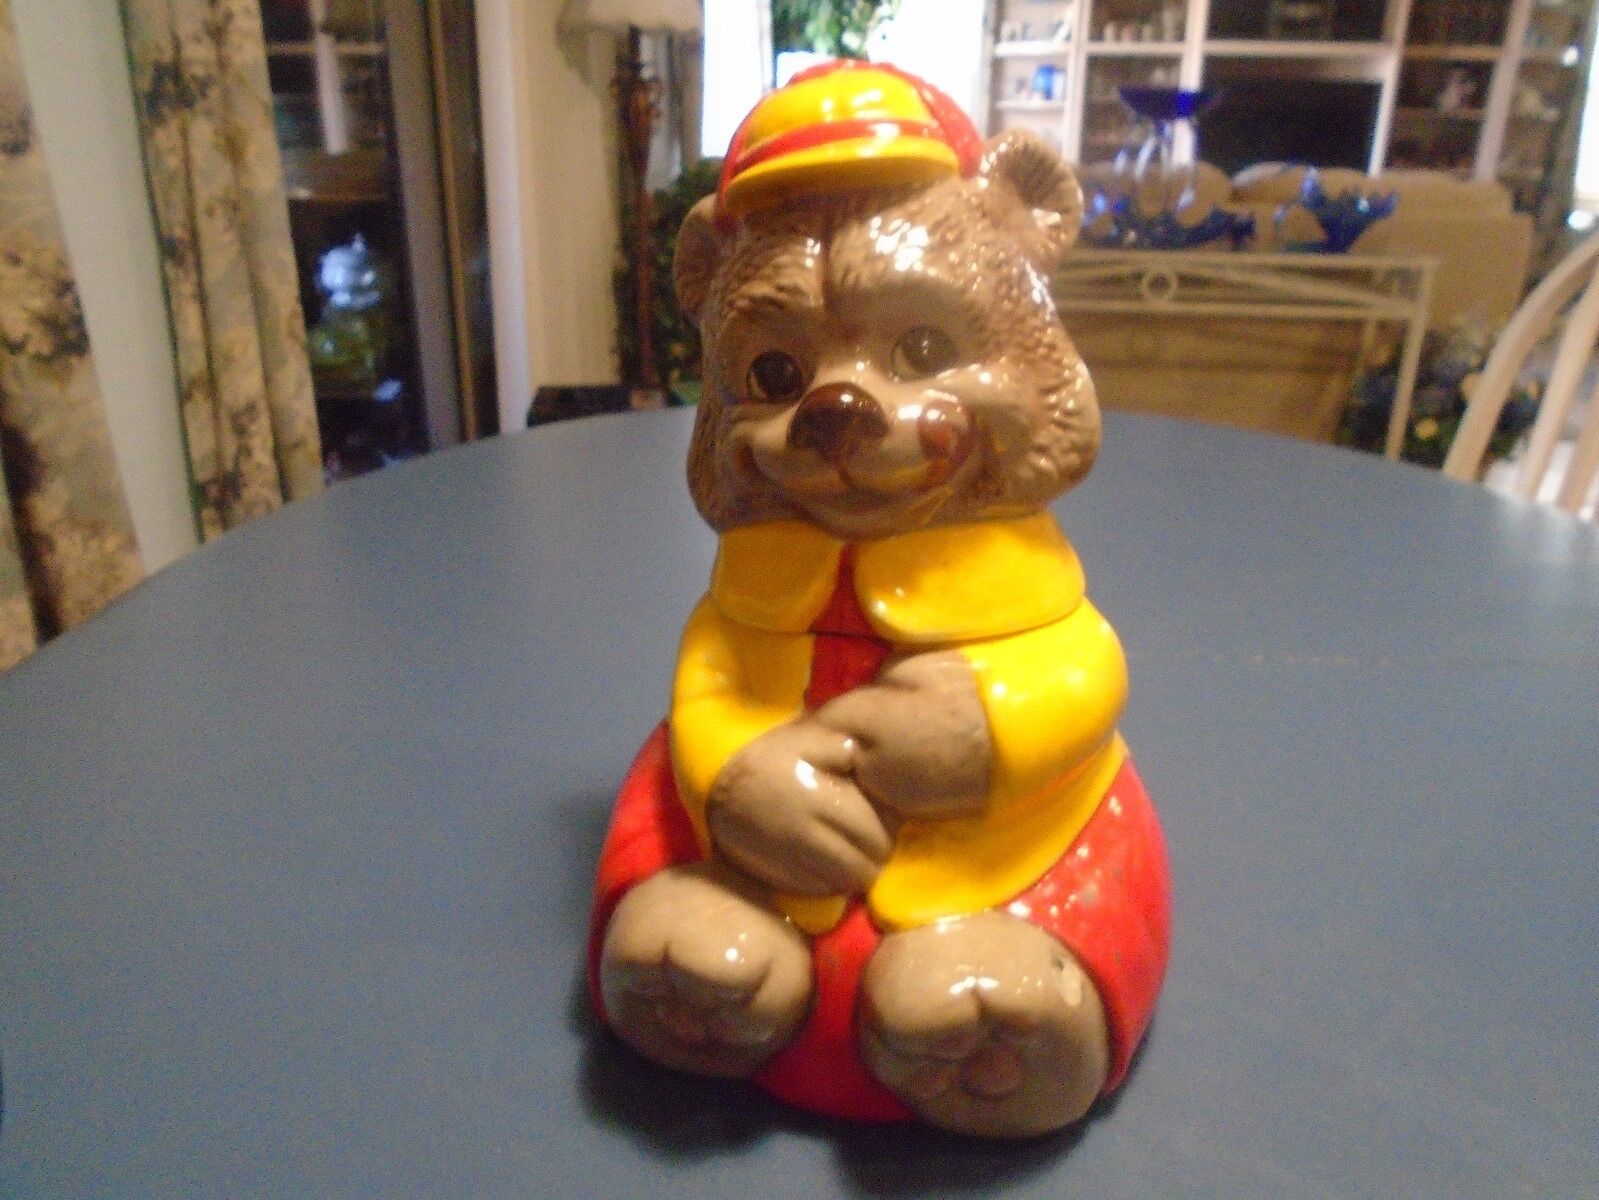 Cute Teddy Bear Dressed in Bright Red and Yellow Ceramic Cookie Jar